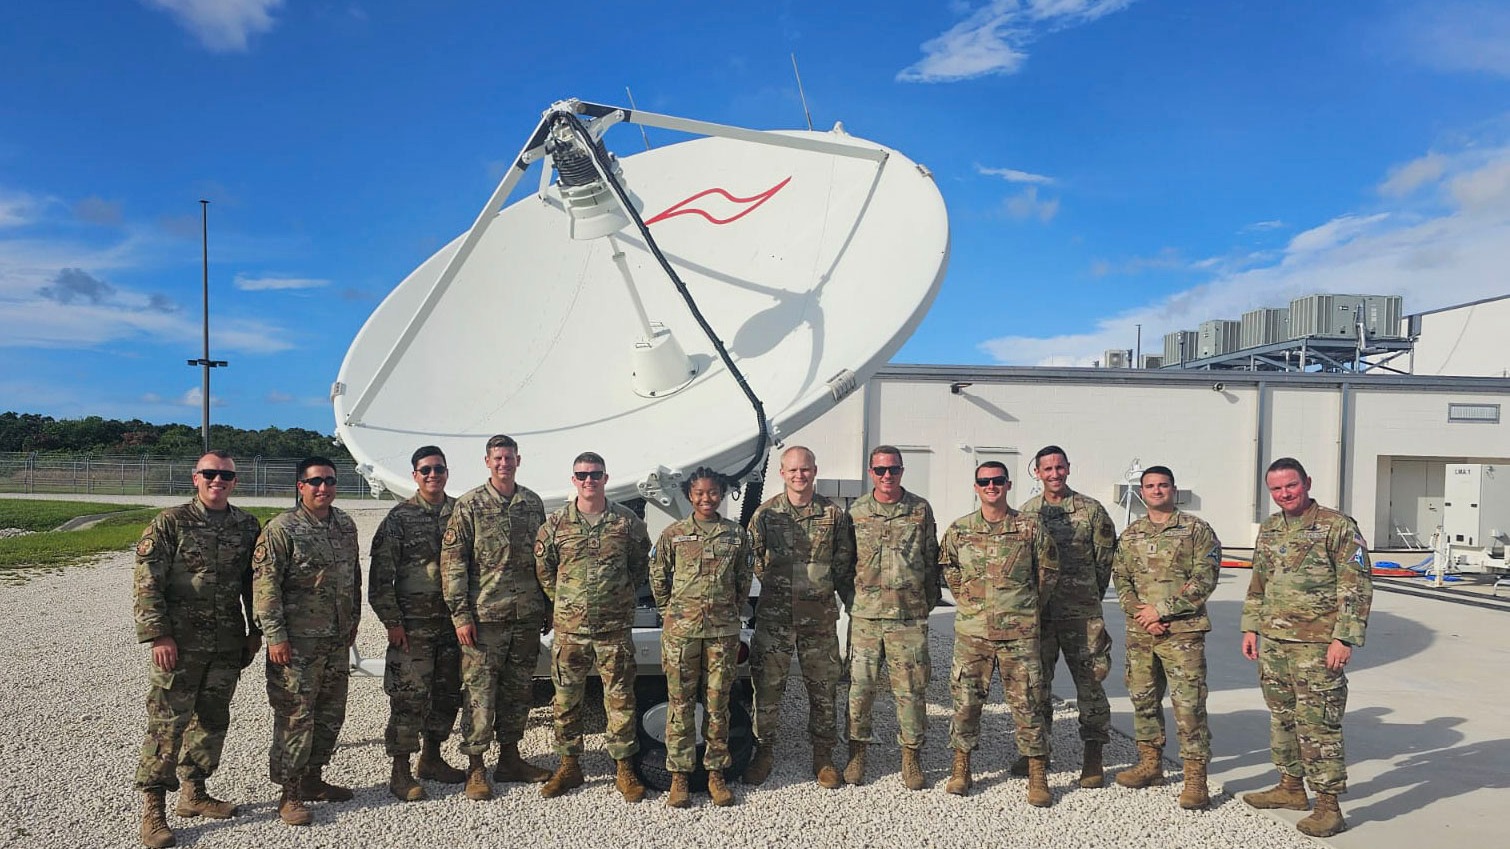 Members from the 114th Electromagnetic Warfare Squadron, 71st, 73rd, and 75th Intelligence, Surveillance, and Reconnaissance Squadrons, 392d Combat Training Squadron, and 379th Space Range Squadron, pose for a group photo during BLACK SKIES 23-3 at Cape Canaveral Space Force Station, Sept. 21, 2023. The BLACK SKIES exercise series focuses on tactical Space Electromagnetic Warfare.

